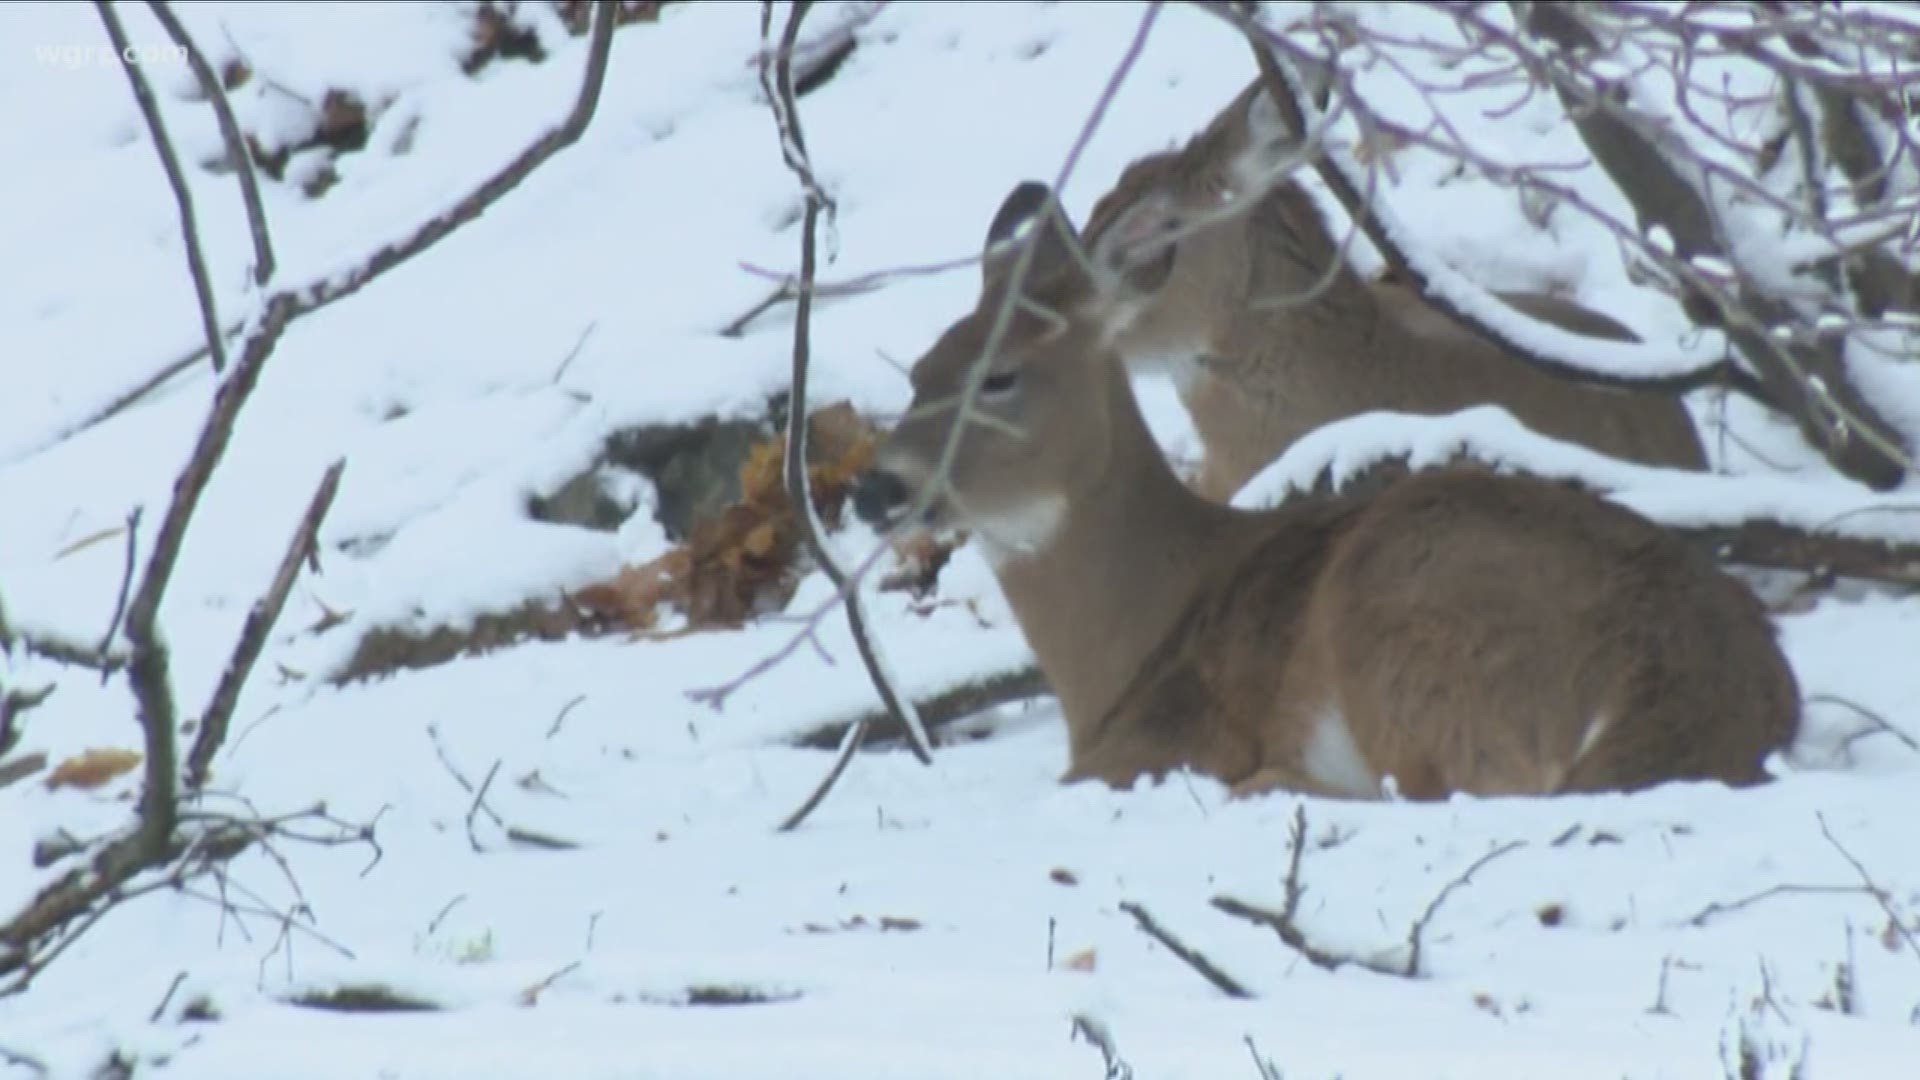 deer are over-running village of Orchard Park